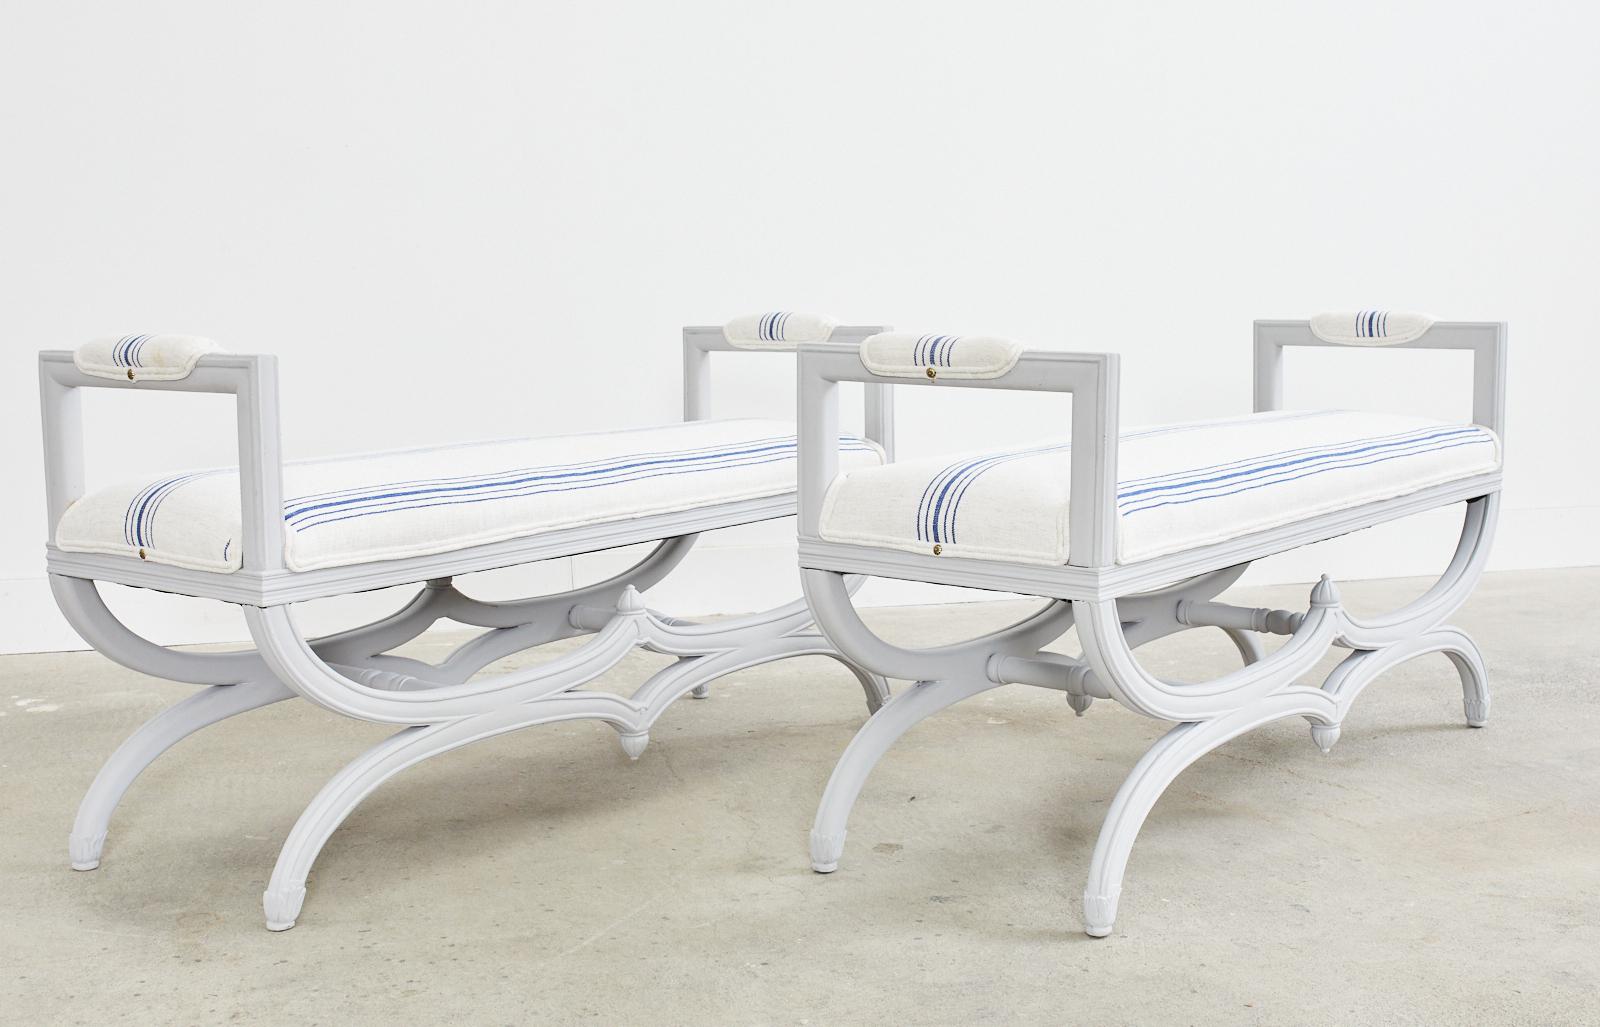 Matching pair of Mid-Century Modern lacquered window benches featuring curule style leg bases. The molded frames have a dove grey painted matte finish with newly upholstered seat cushions and padded arms. The soft fabric has a french linen blue and